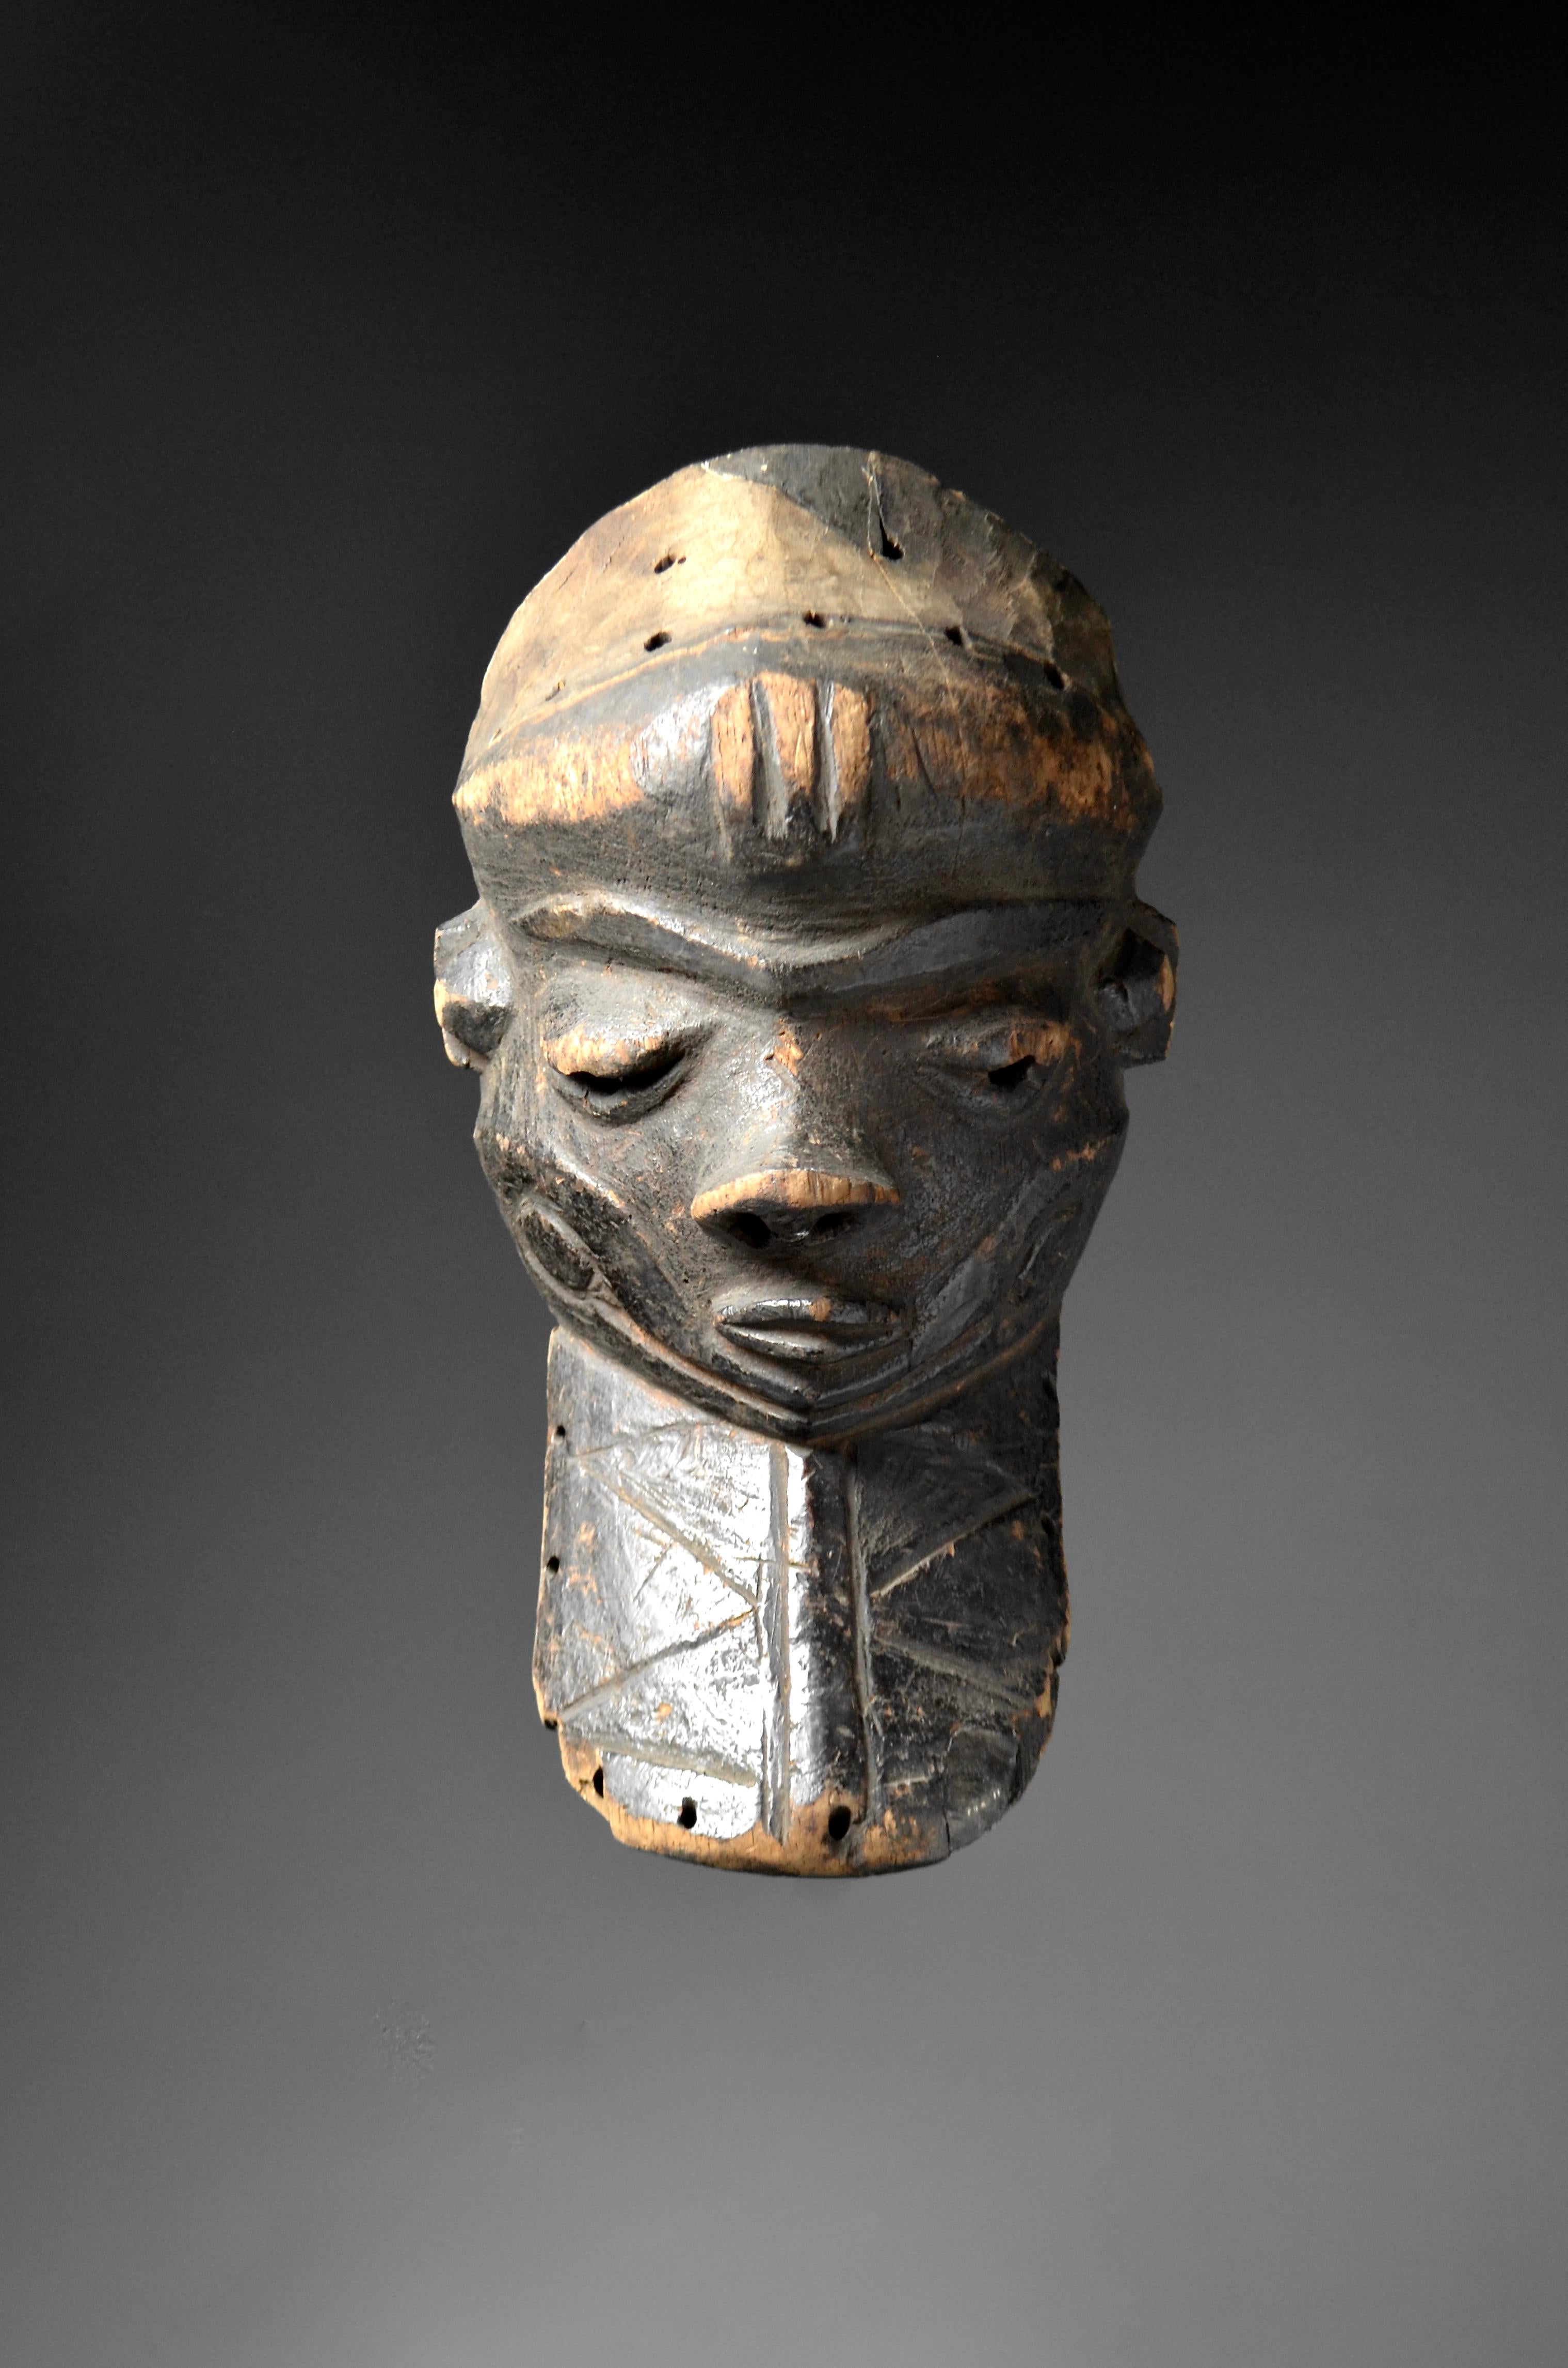 Kiwoyo-Muyombo mask
Pende
DRC
Wood
30cm

small restoration on the top

on a professional customised metal stand

ex private collection London, UK